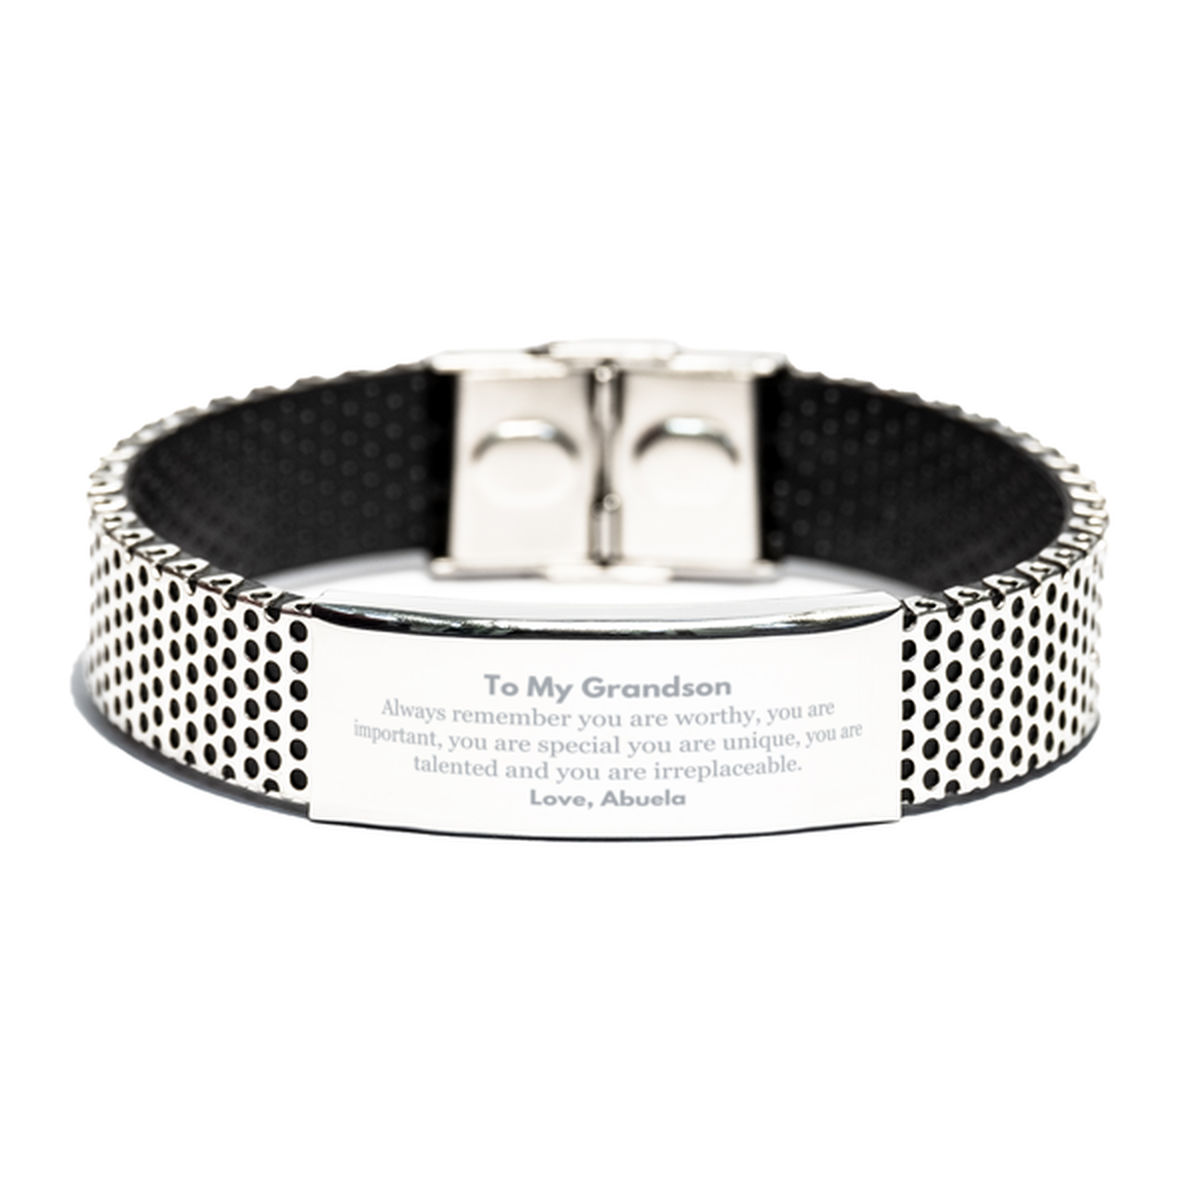 Grandson Birthday Gifts from Abuela, Inspirational Stainless Steel Bracelet for Grandson Christmas Graduation Gifts for Grandson Always remember you are worthy, you are important. Love, Abuela